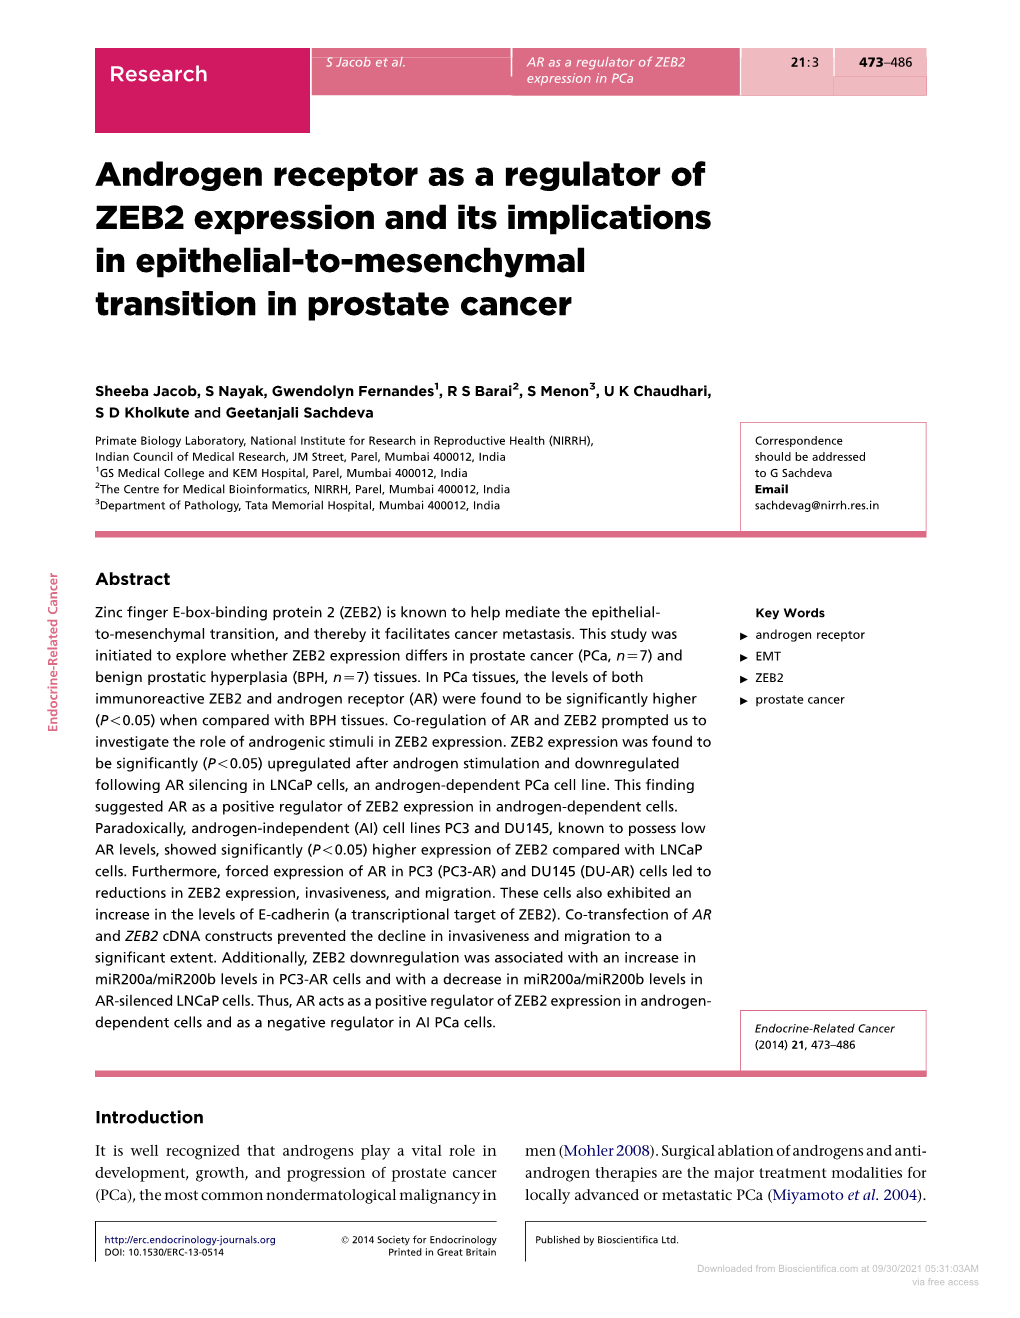 Androgen Receptor As a Regulator of ZEB2 Expression and Its Implications in Epithelial-To-Mesenchymal Transition in Prostate Cancer